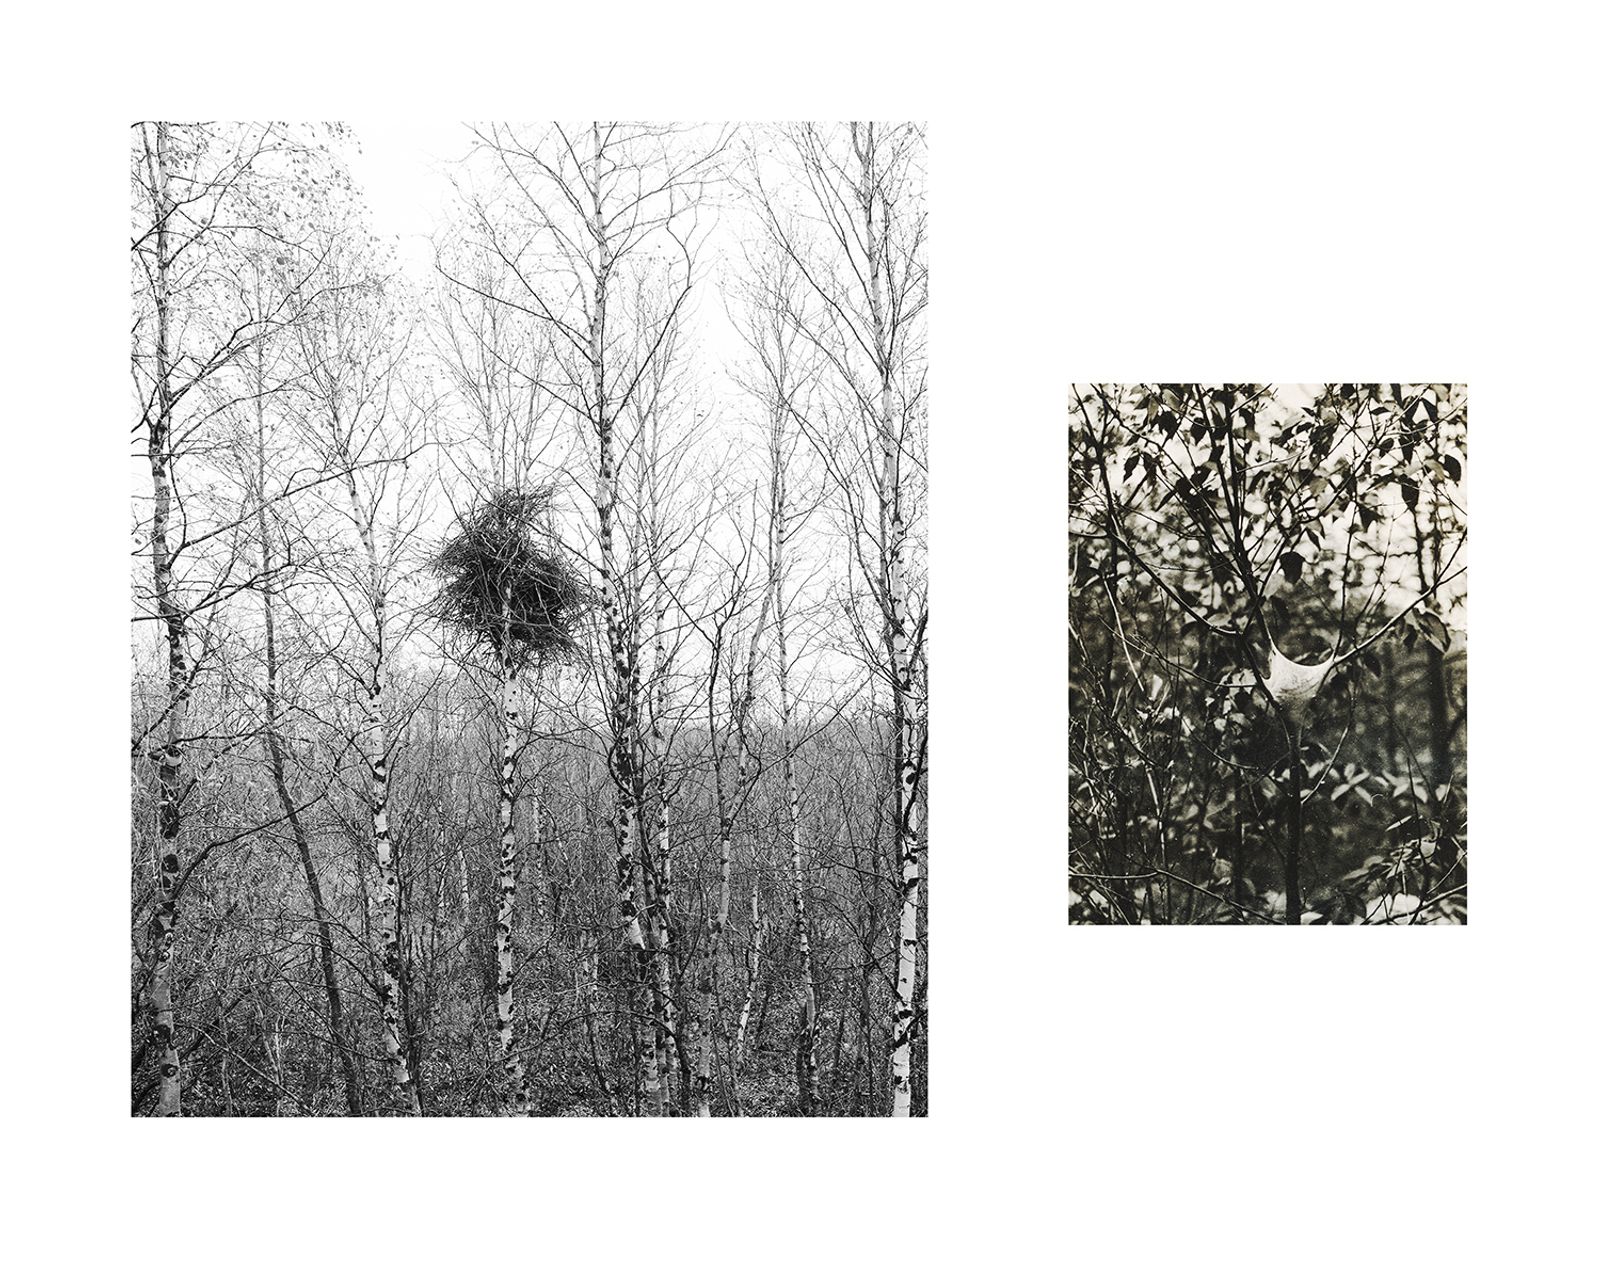 © Marion Belanger - Image from the Wired Forest photography project